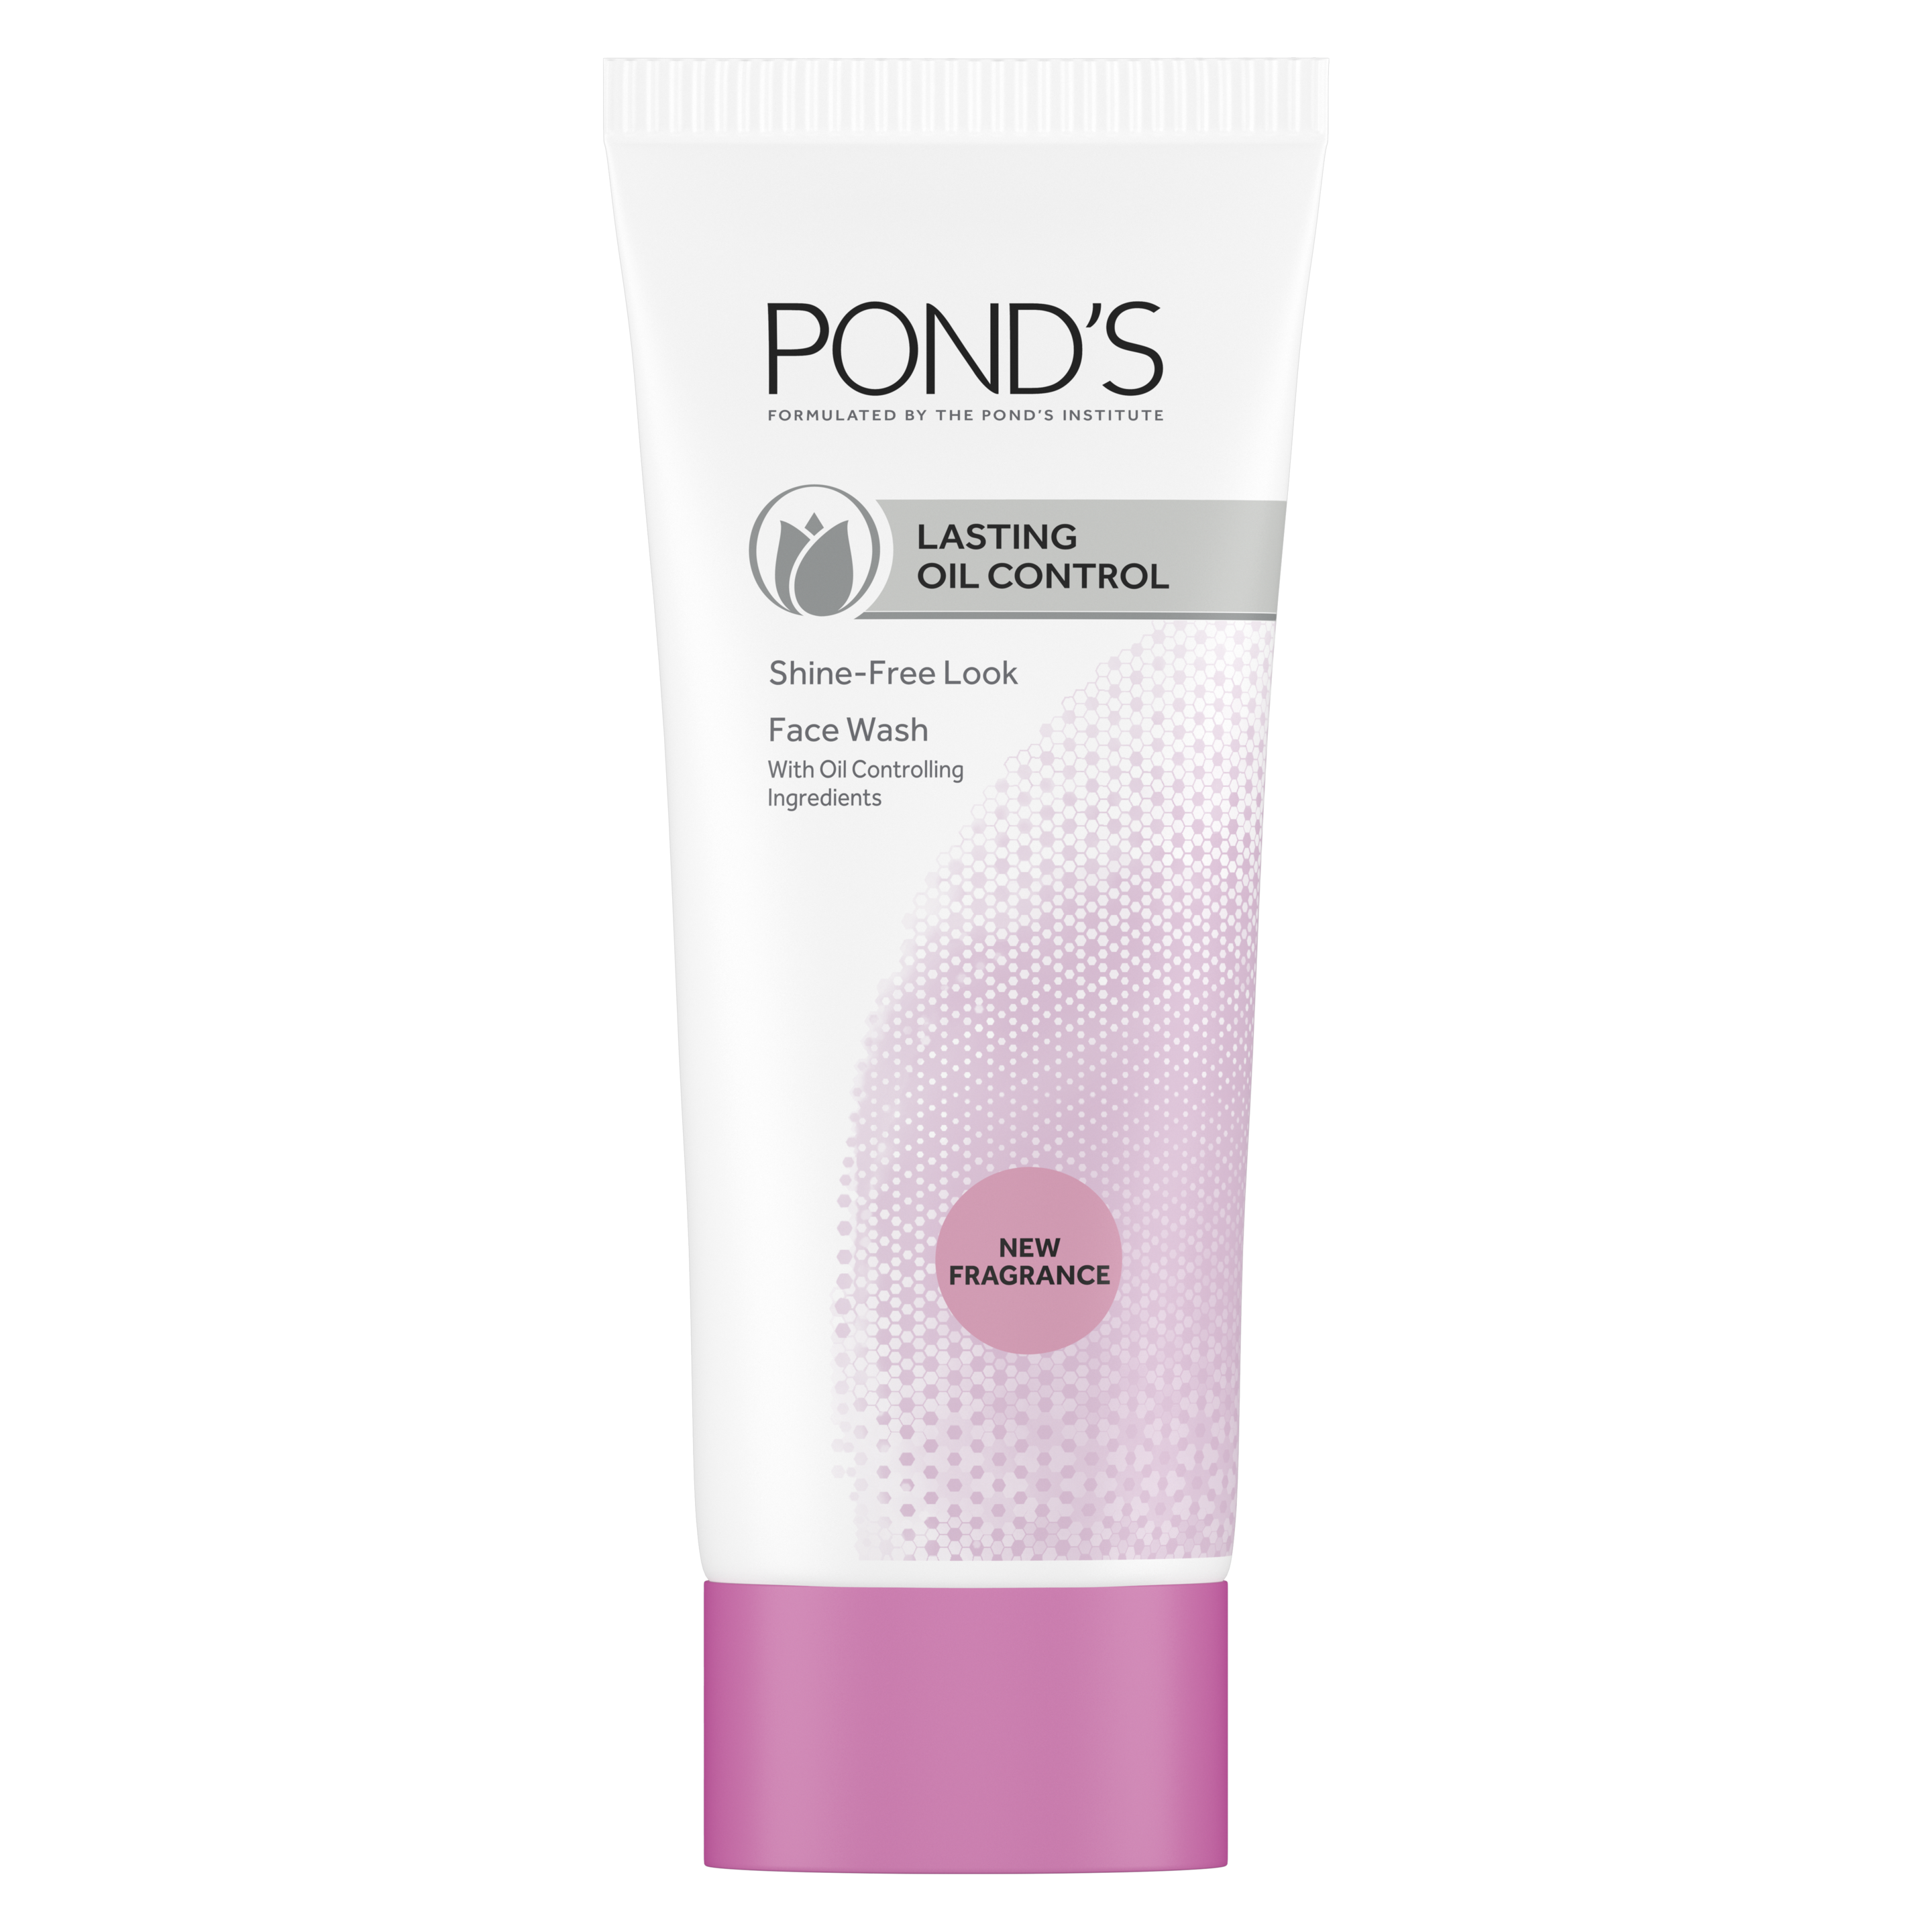 POND'S Lasting Oil Control Face Wash for Normal to Oily Skin